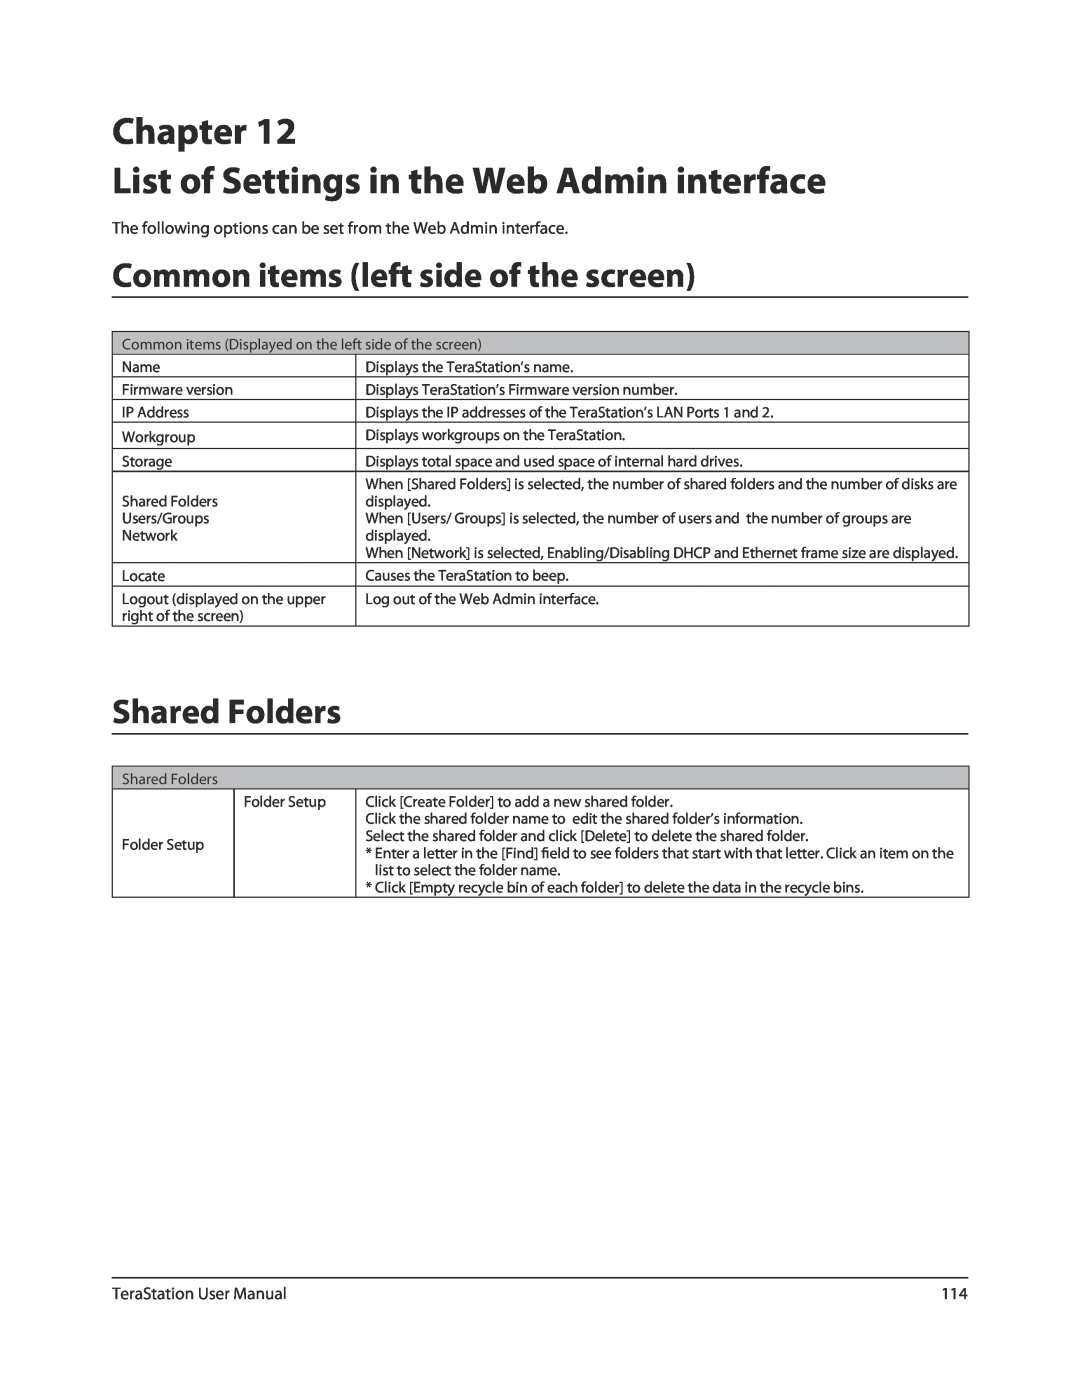 Buffalo Technology TS-RXL Chapter List of Settings in the Web Admin interface, Common items left side of the screen 